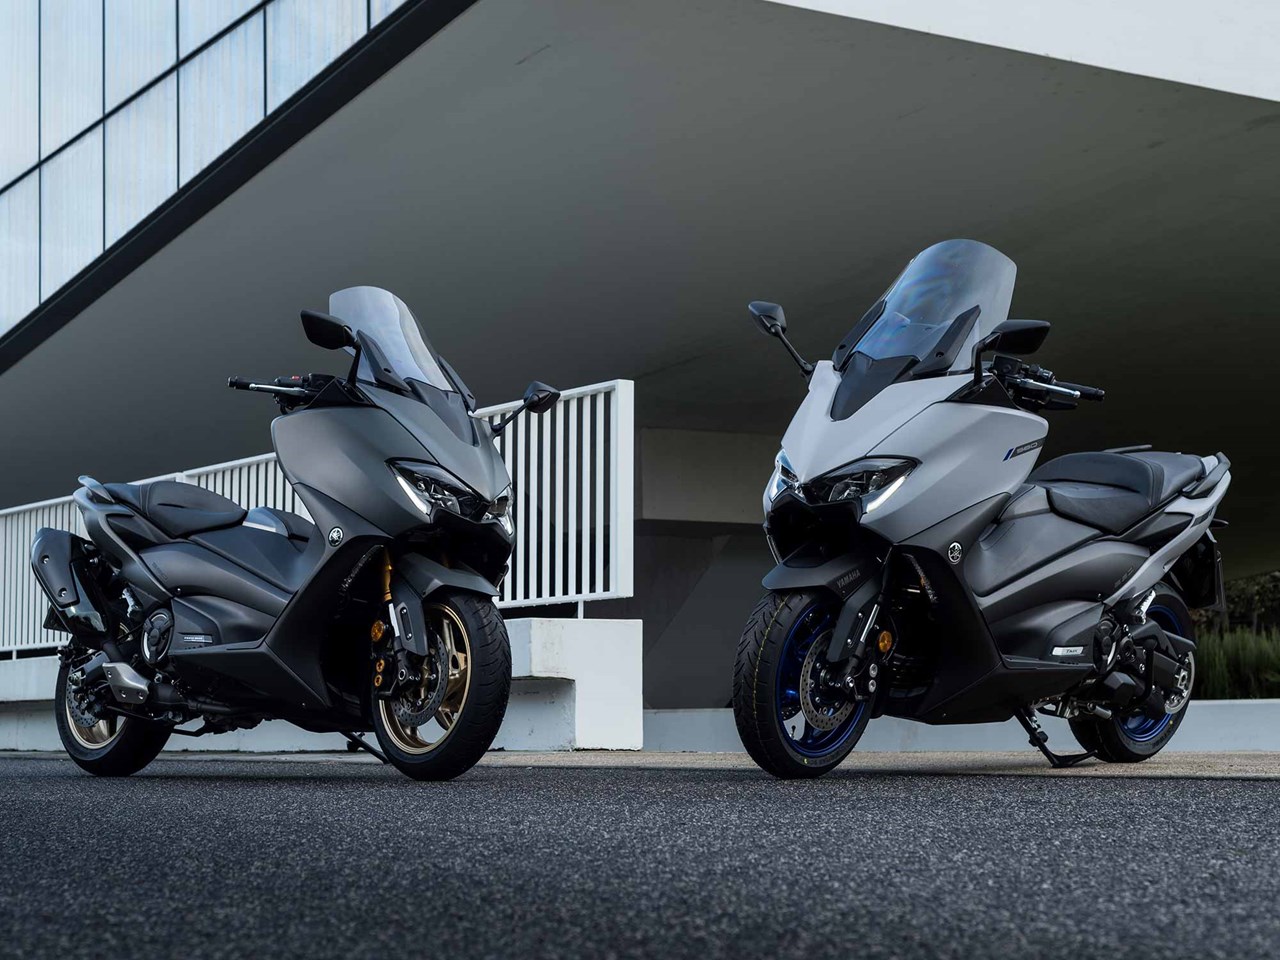 Yamaha TMAX 560, The Pinnacle Sport Scooter Gets a Boost - Asphalt & Rubber